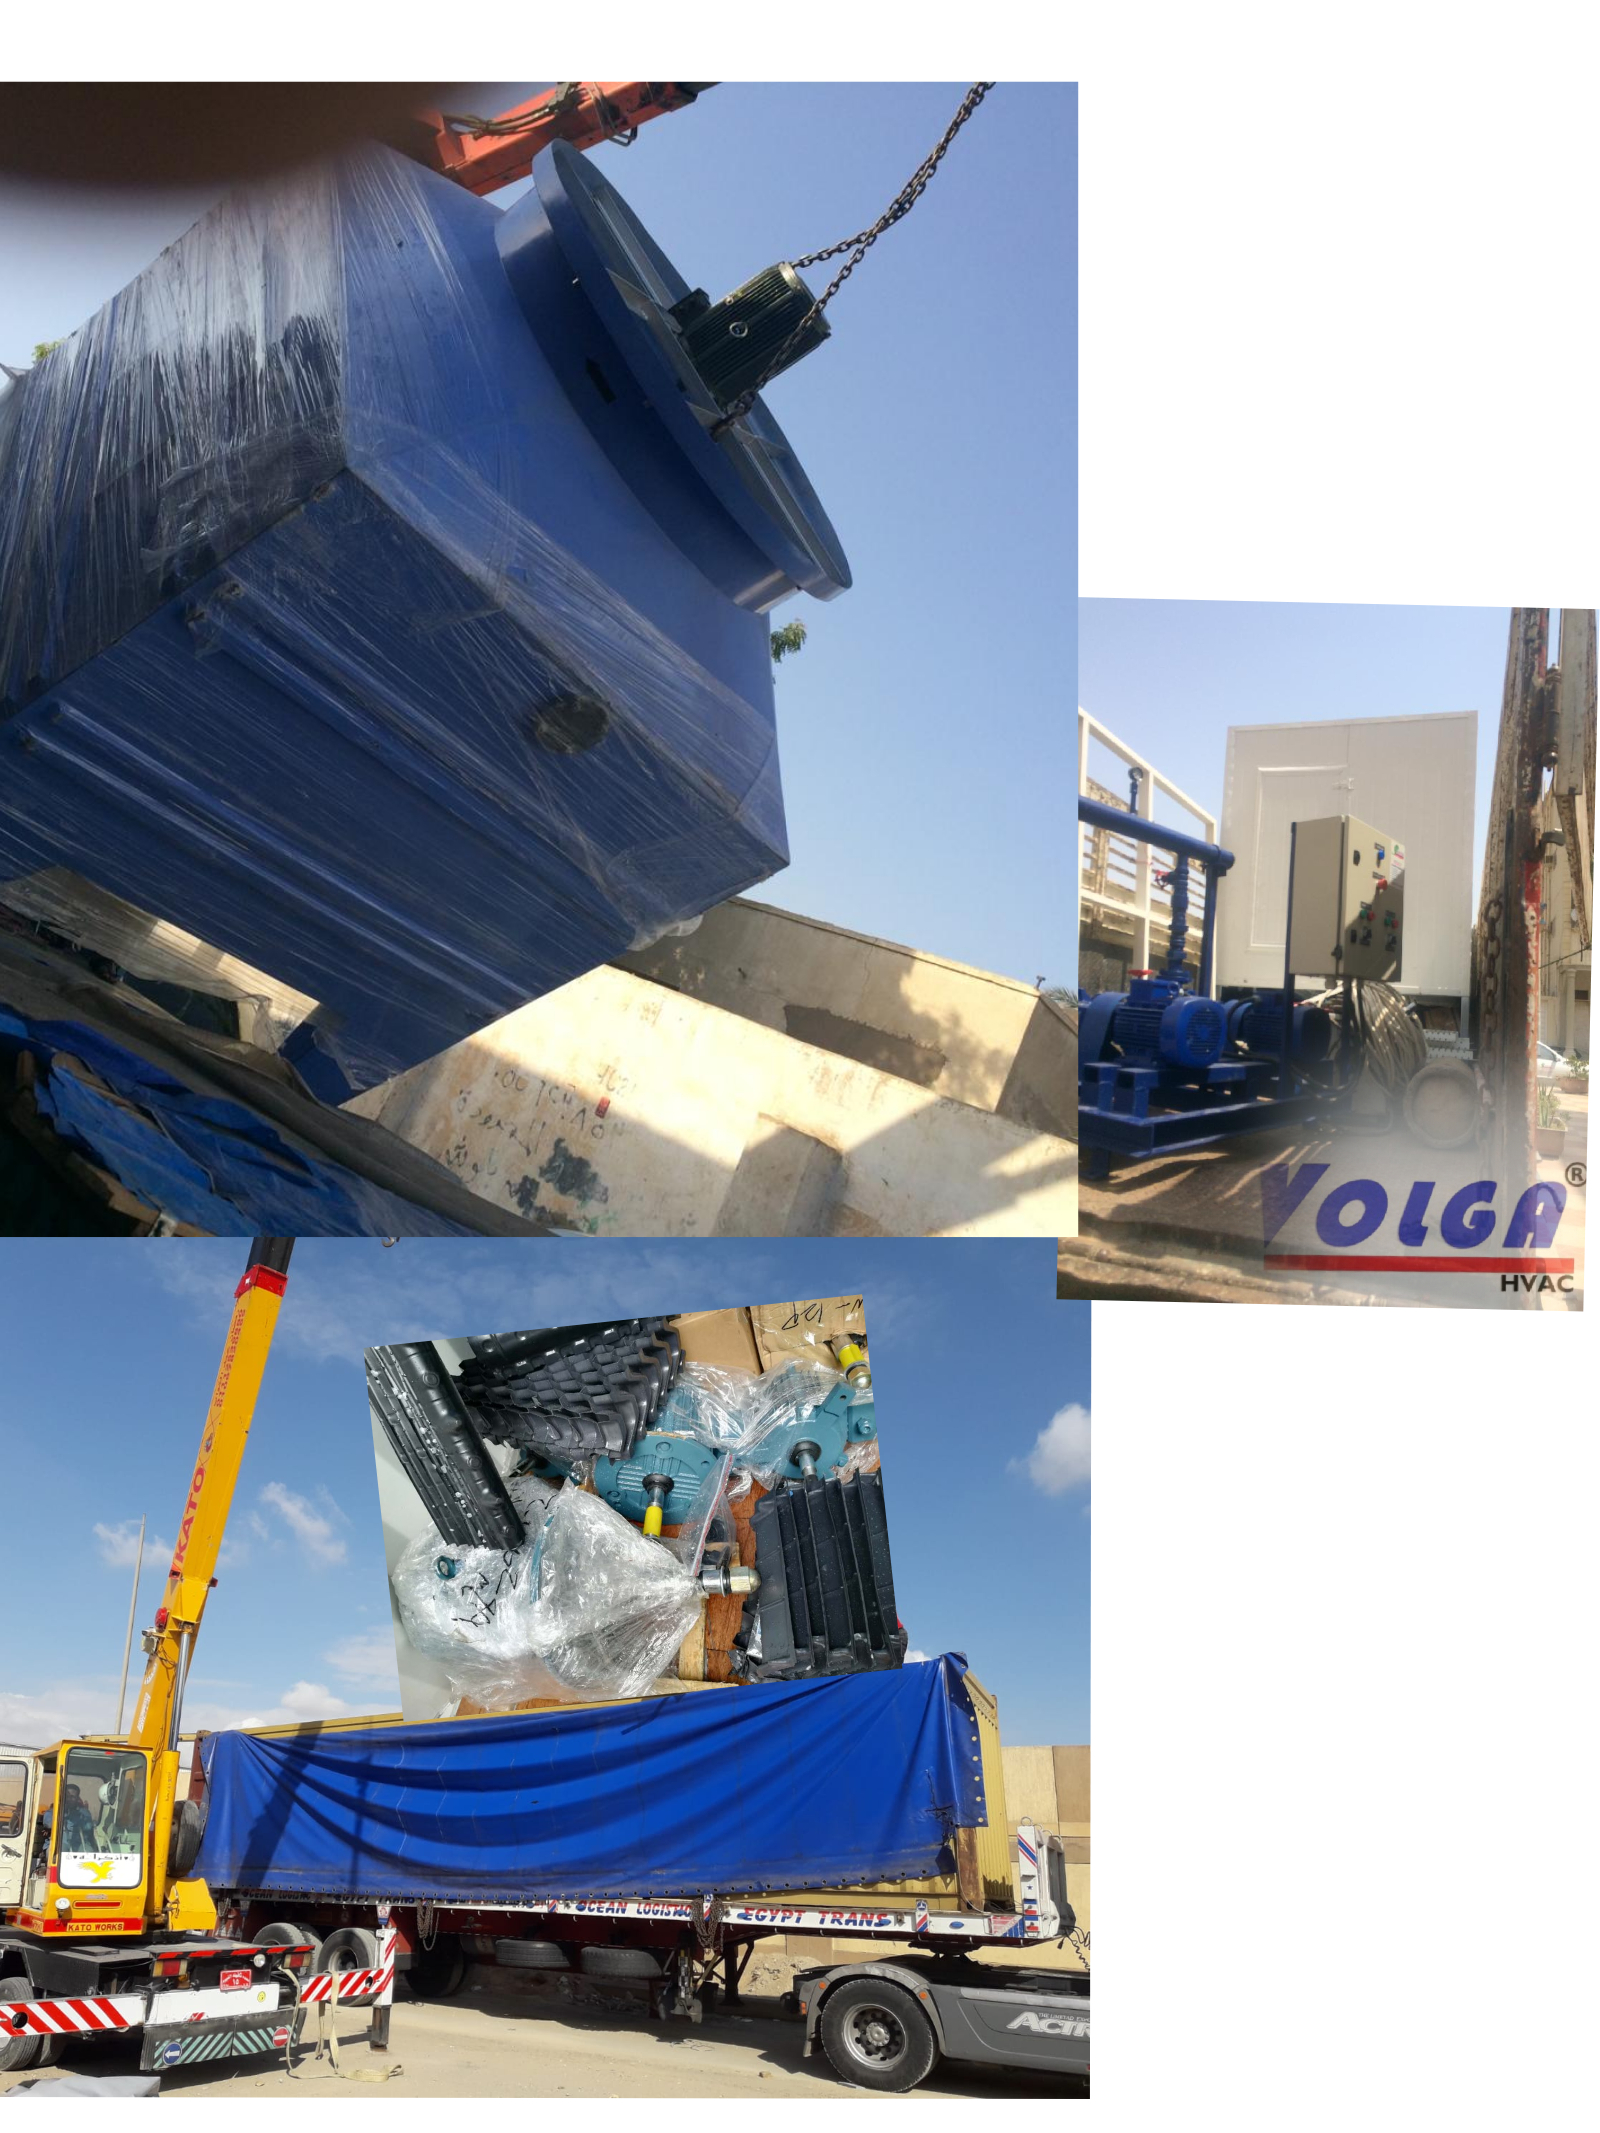 Manufacturing, supply of the Volga FRP Cooling Tower for AL-BARRAK Co ( Abdullah A, Al-barrak & Sons.Co